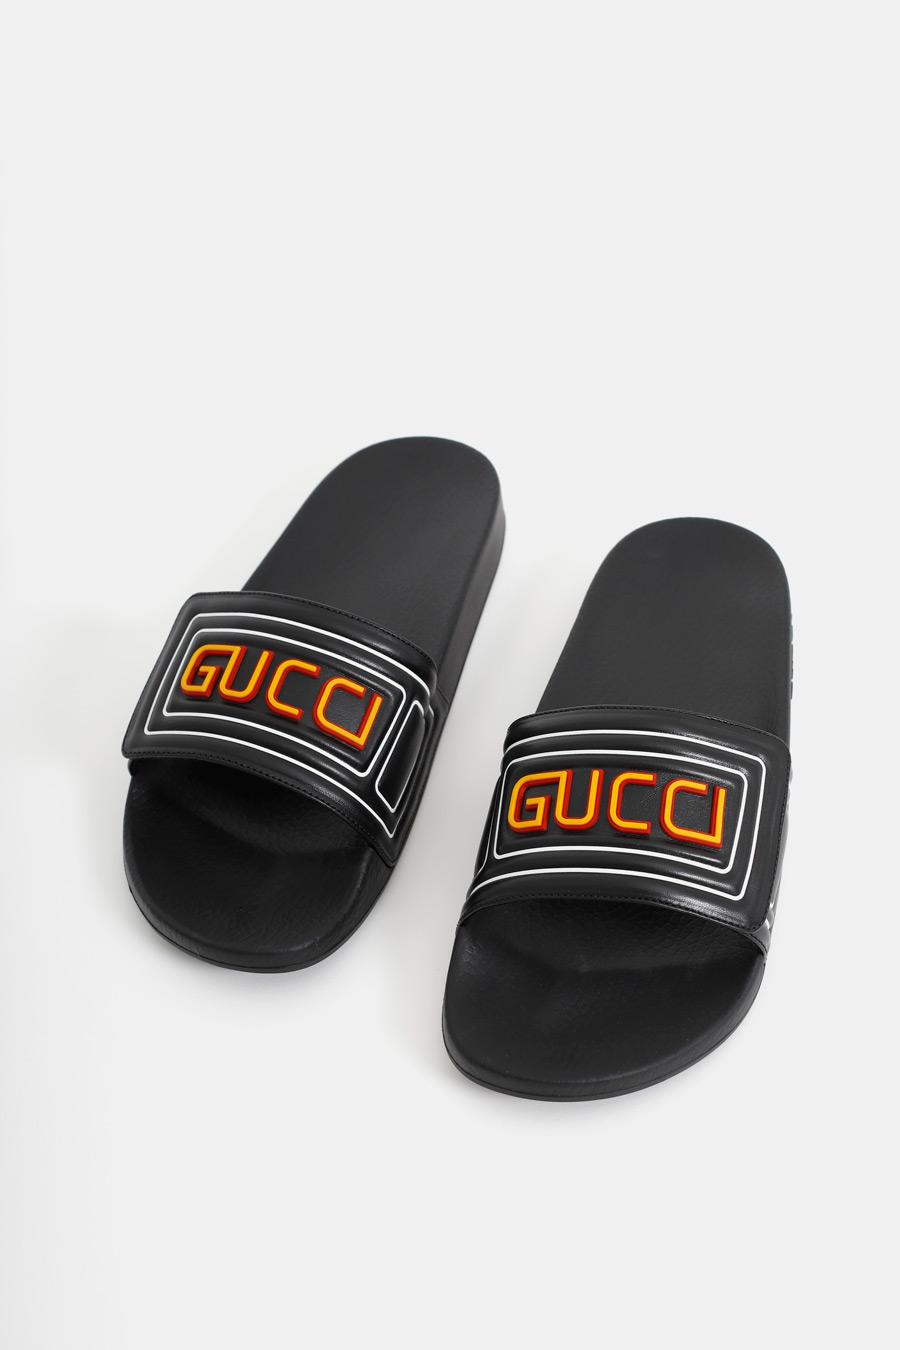 gucci slides with logo